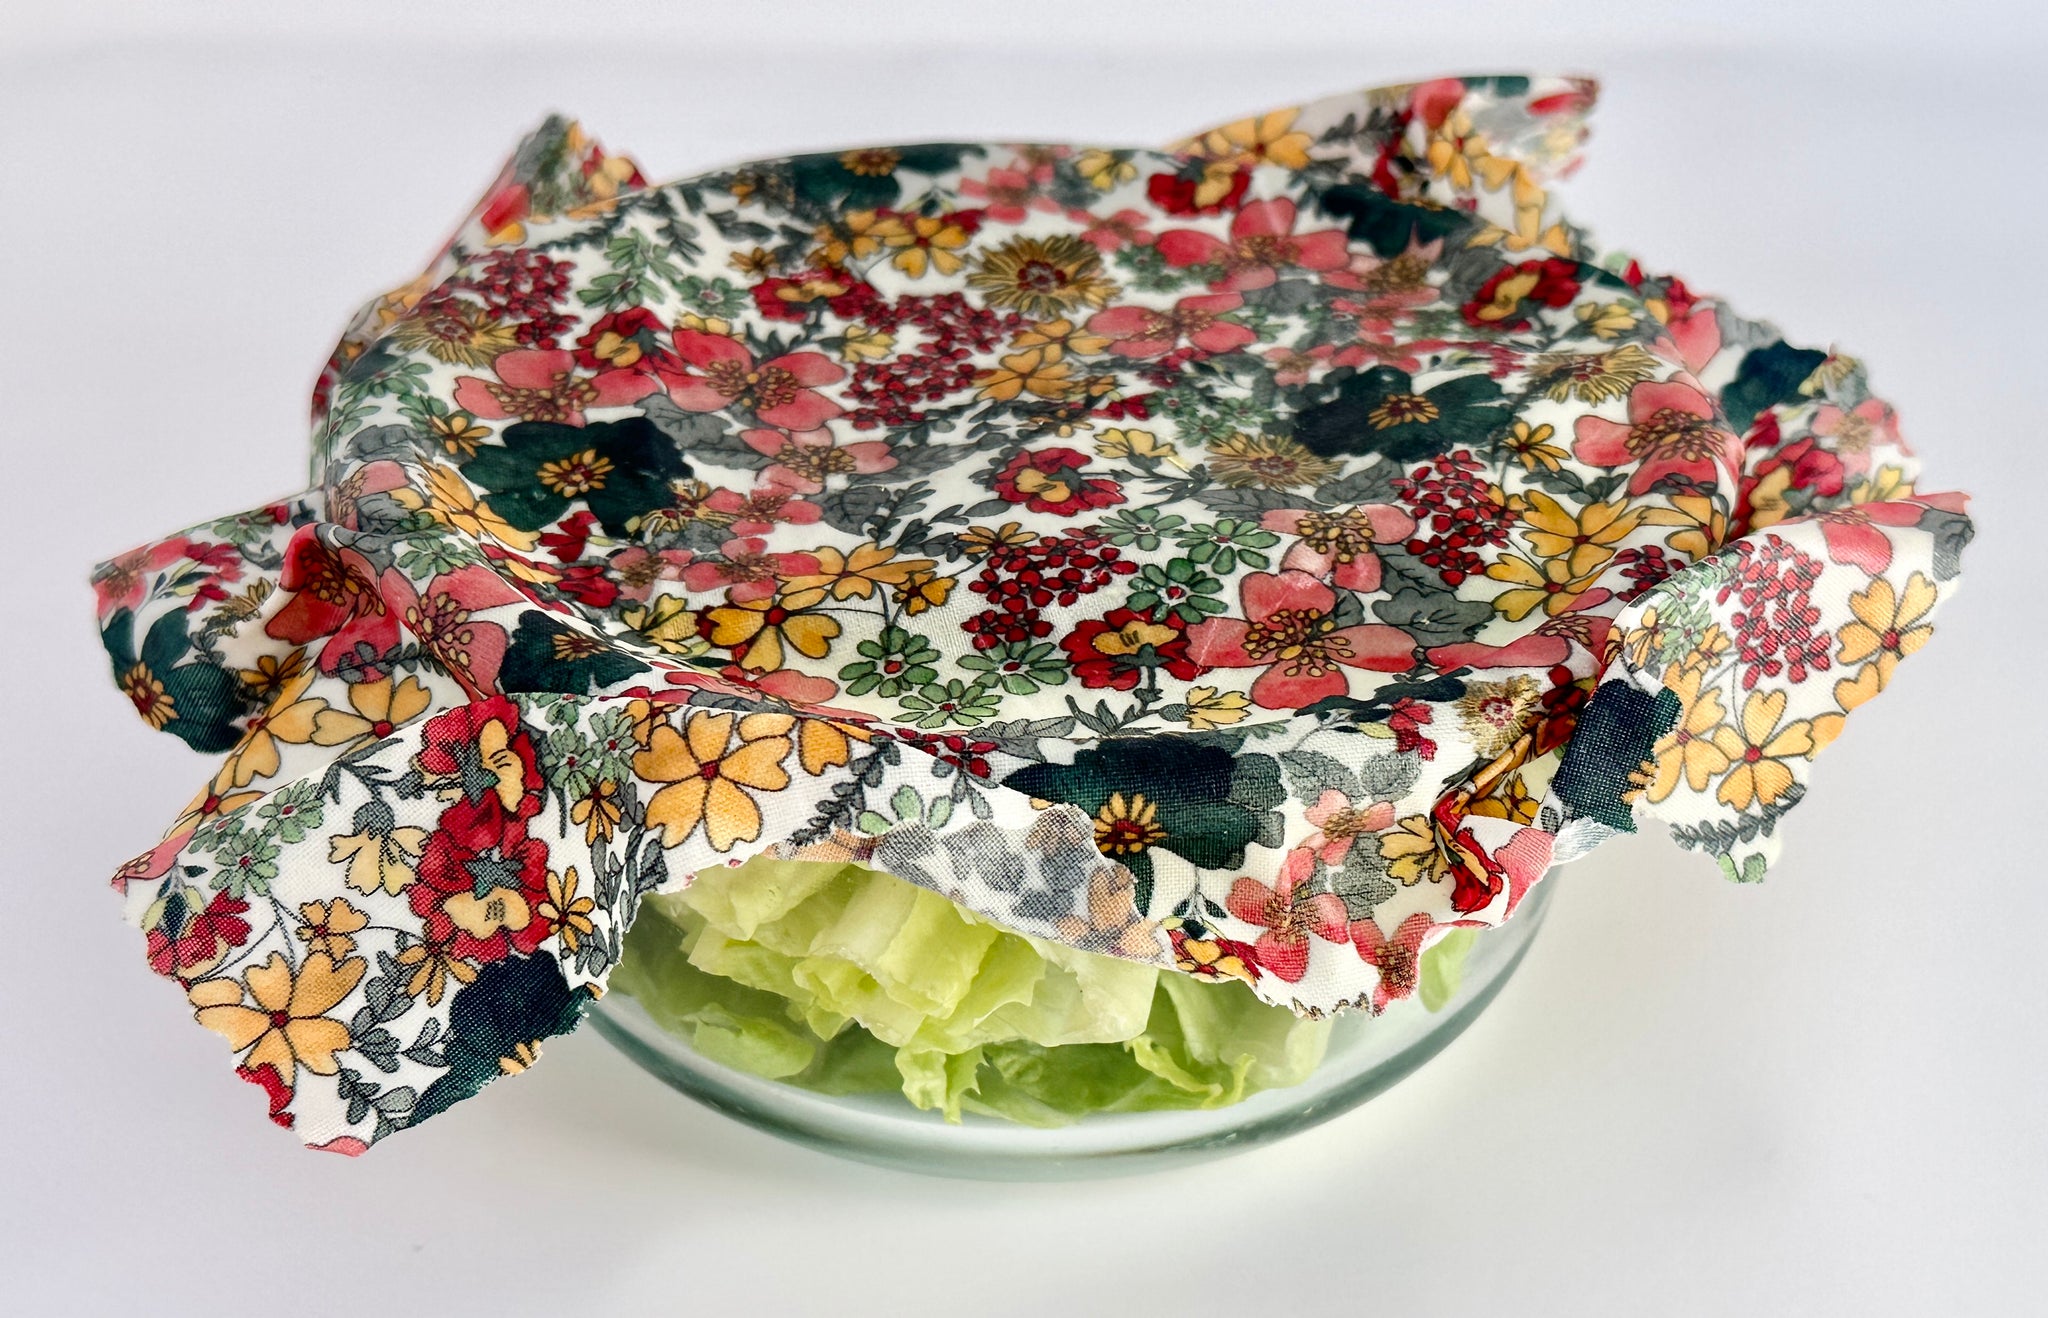 The Best Natural Beeswax Reusable Food Wraps Get Your Veggie On